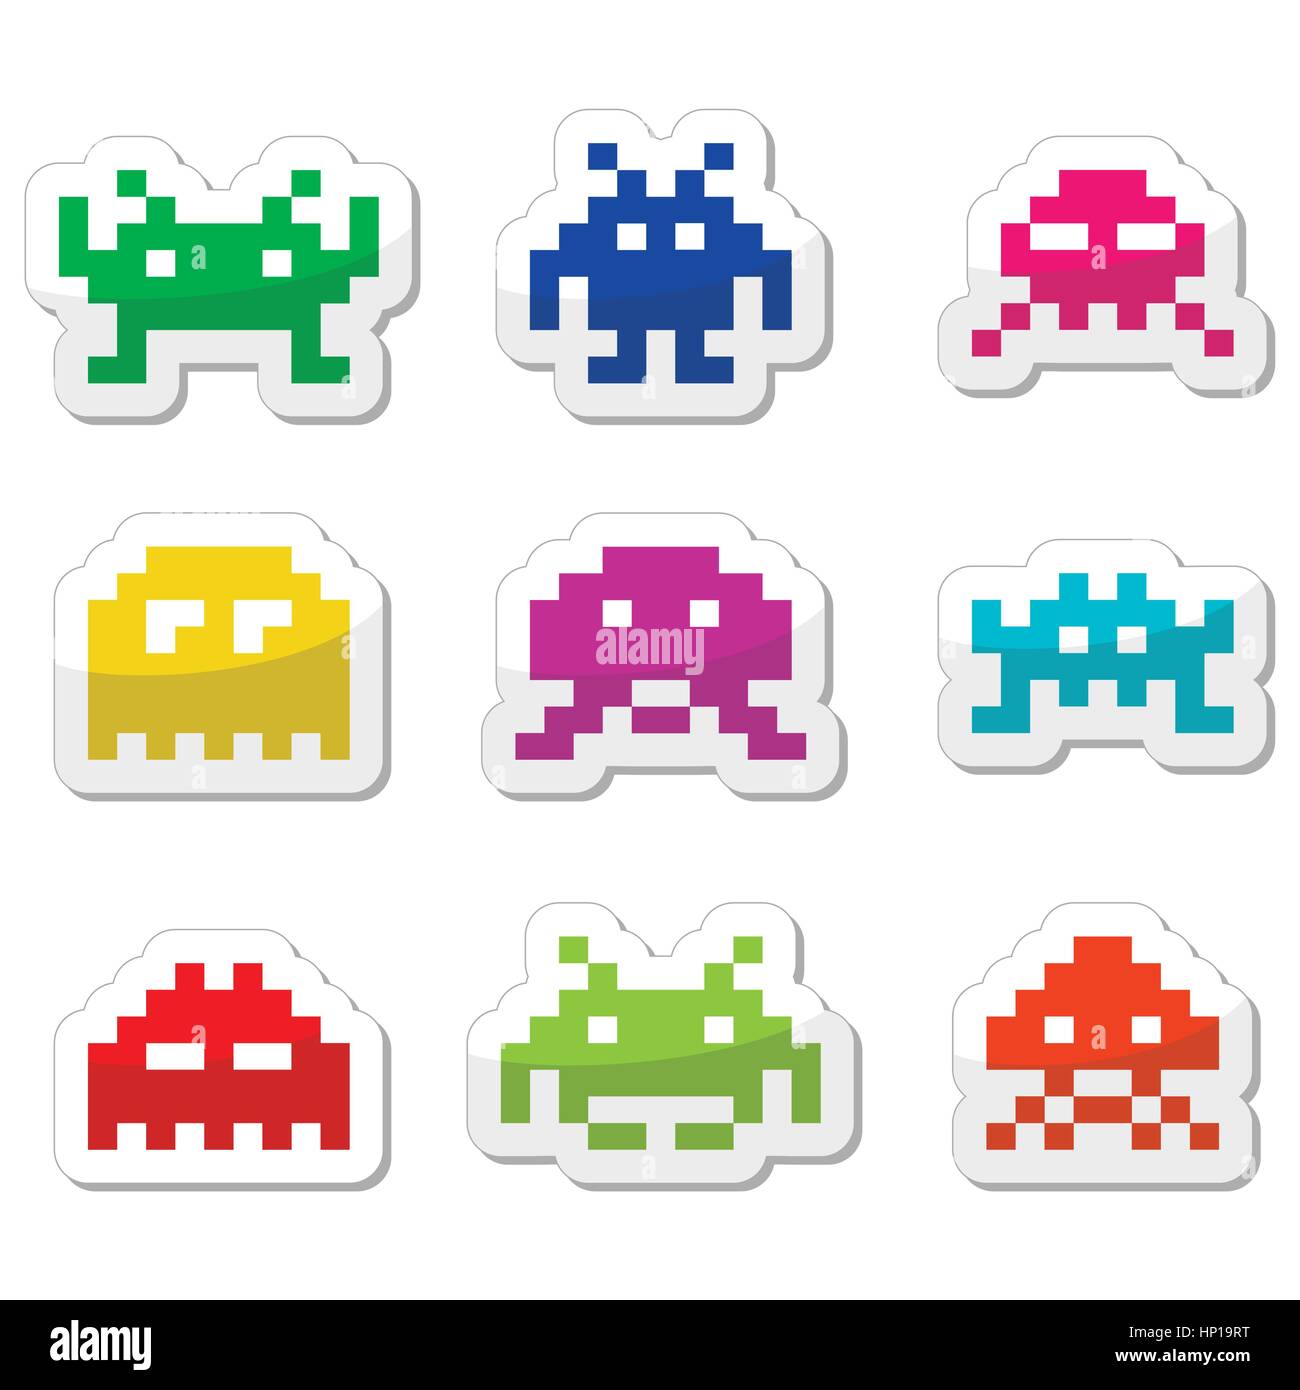 Space invaders, 8bit aliens icons set Stock Vector